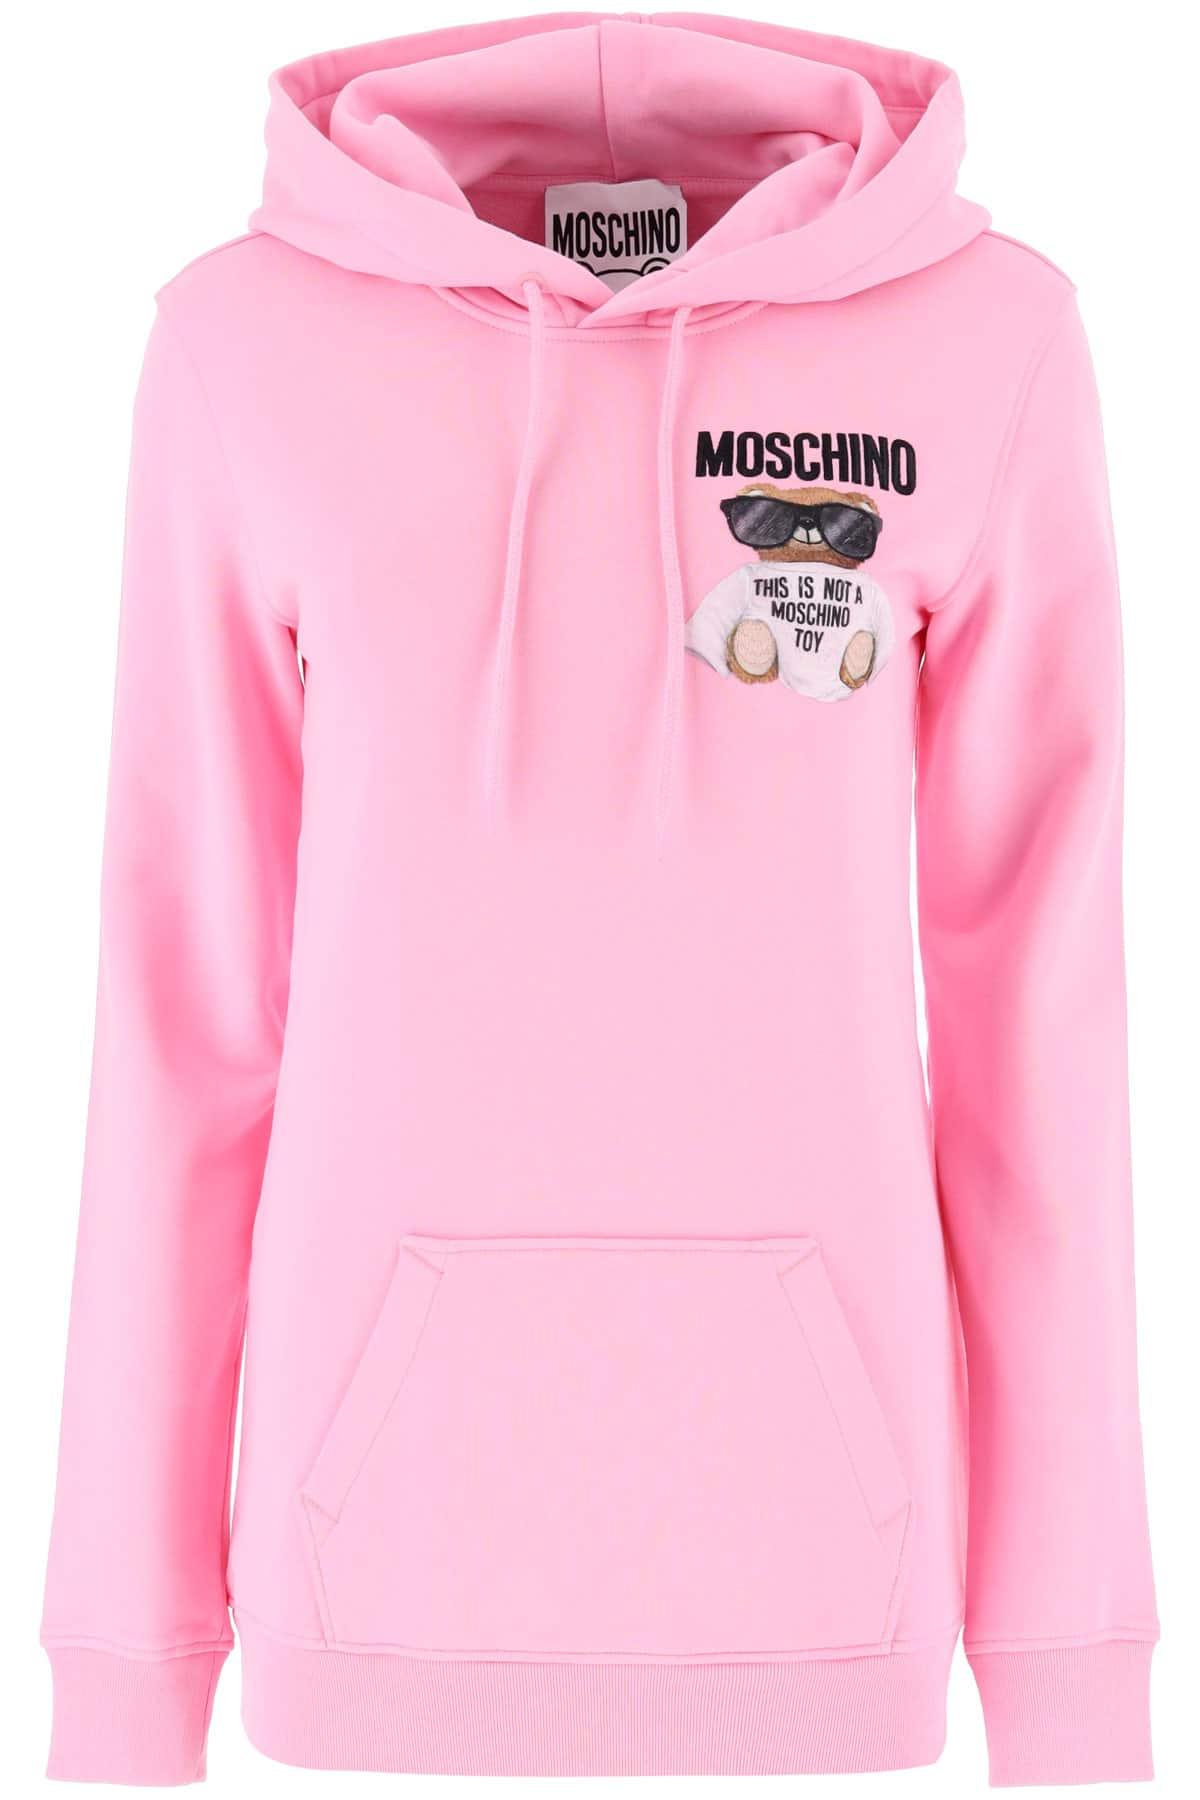 Moschino Cotton Micro Teddy Bear Hoodie in Pink - Lyst